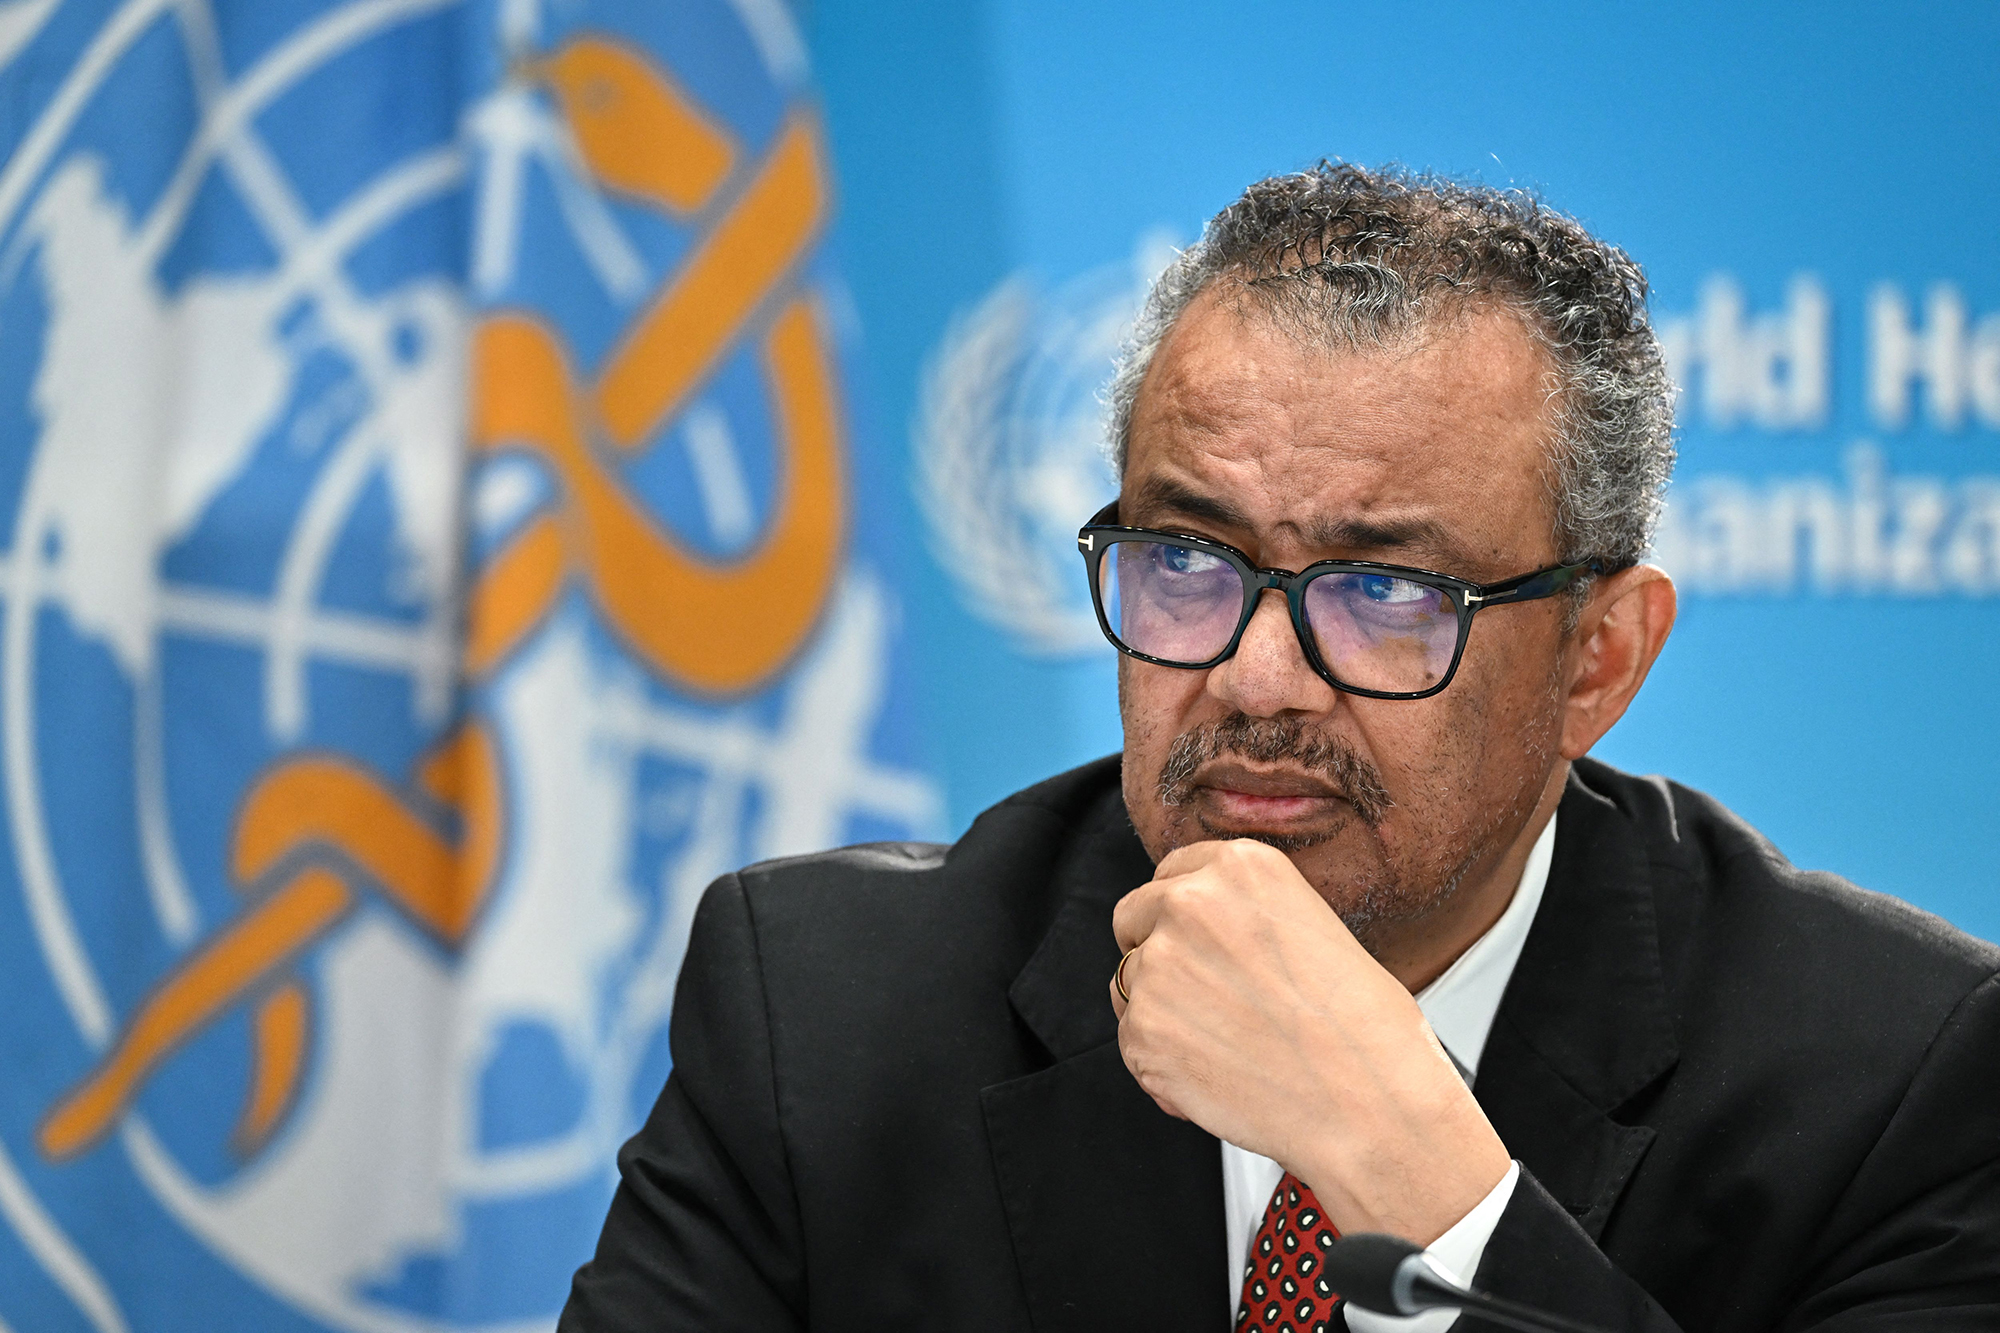 World Health Organization (WHO) chief Tedros Adhanom Ghebreyesus attends a press conference on the World Health Organization's 75th anniversary in Geneva, Switzerland, on April 6.